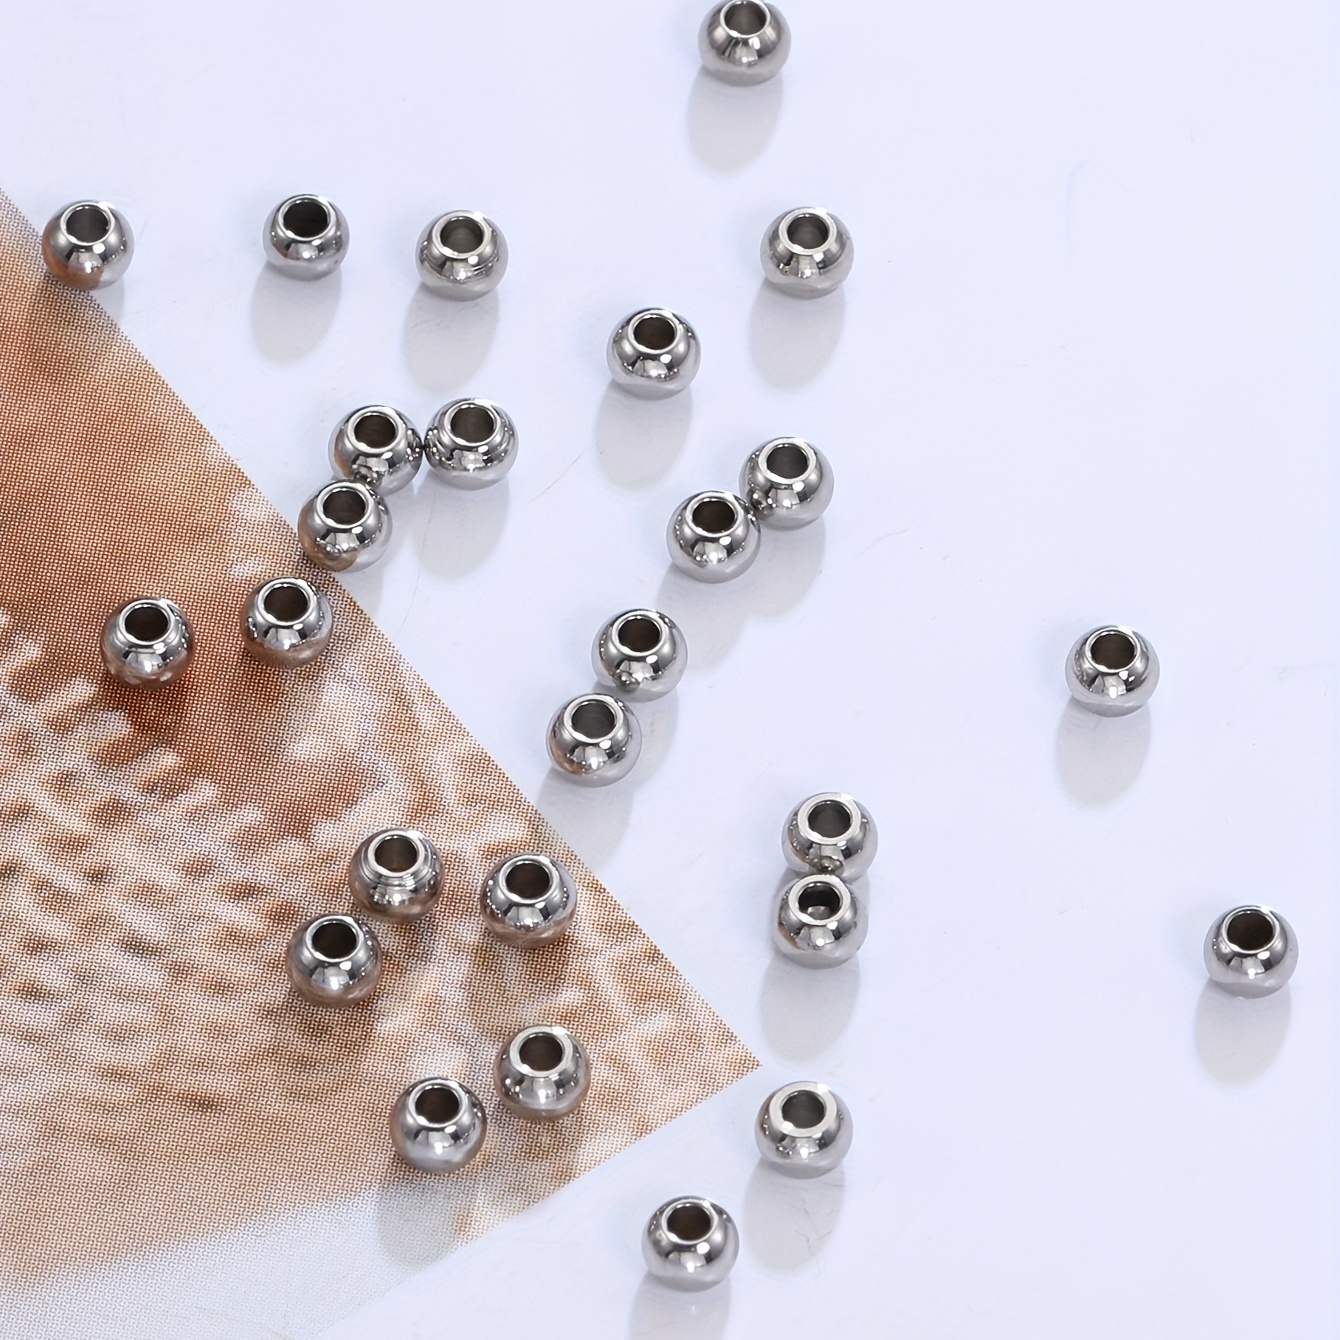 Stainless Steel Beads Metal Big Hole Spacer Beads for Jewelry Making Metal  Round Beads 3*4mm DIY Bracelet Necklace 200pcs - AliExpress